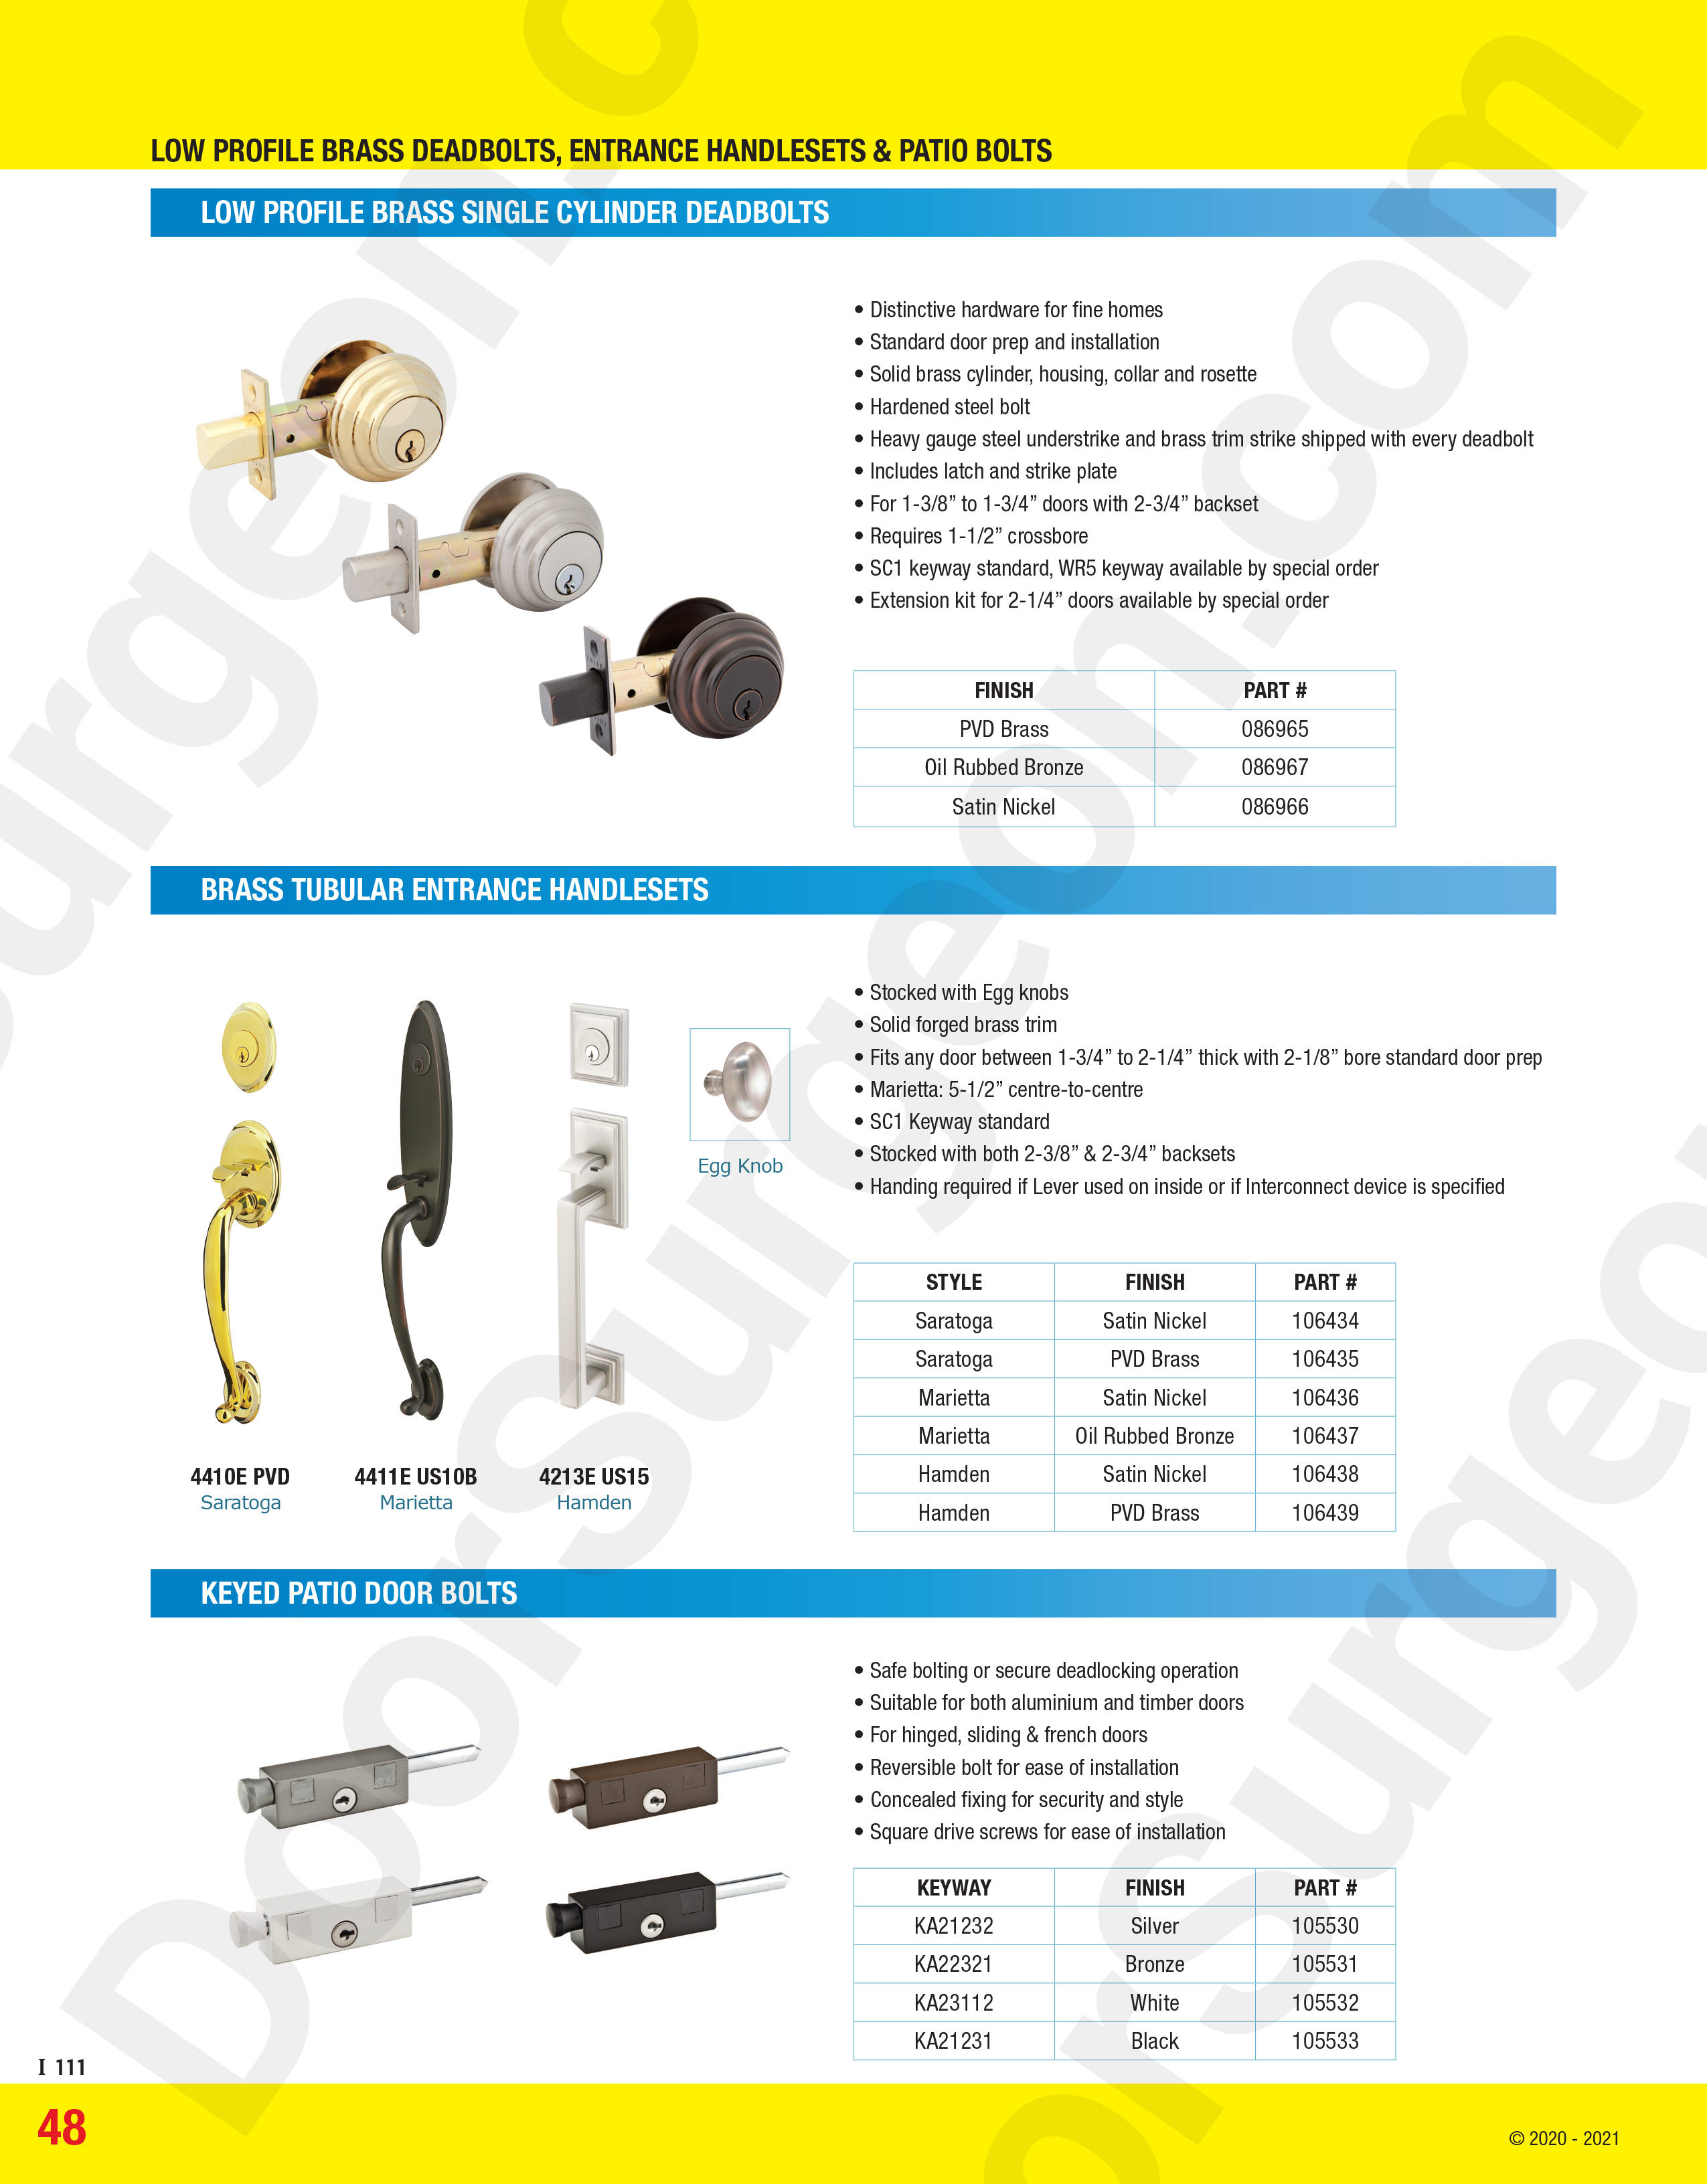 made for style and function schlage deadbolts and handles. Secondary locking Patio pins to lock down patio doors